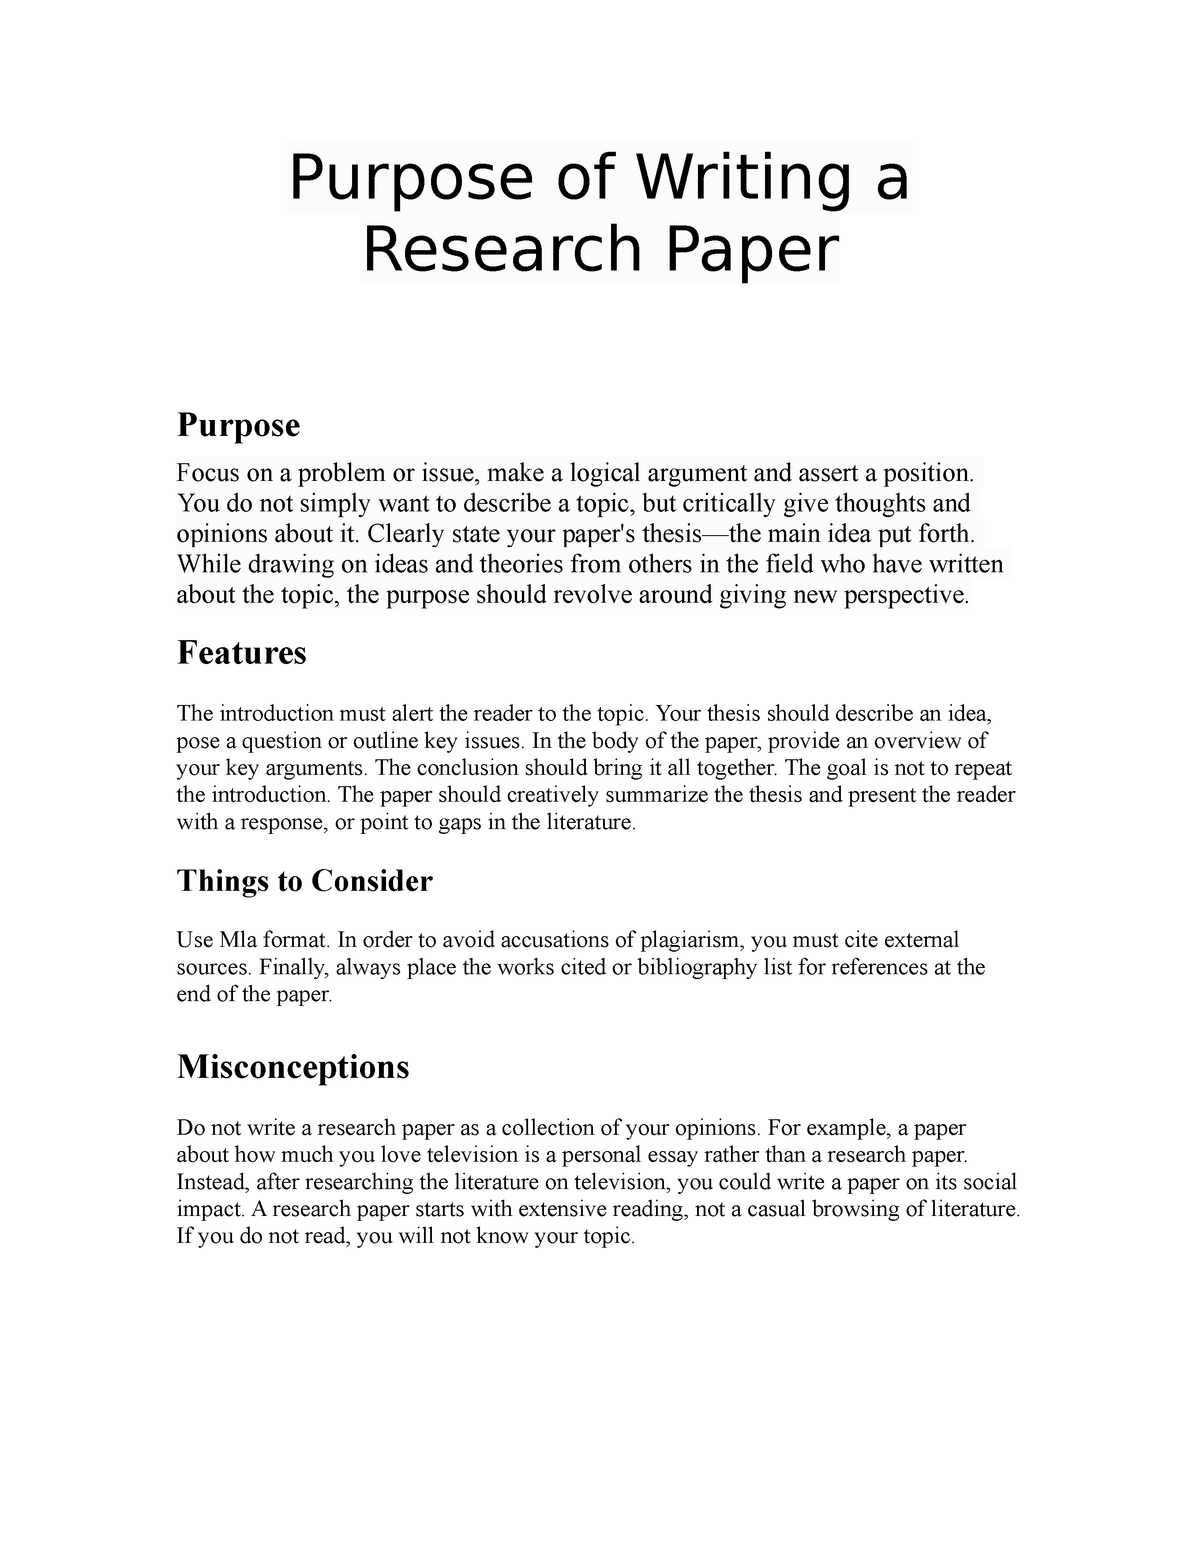 thesis research paper purpose